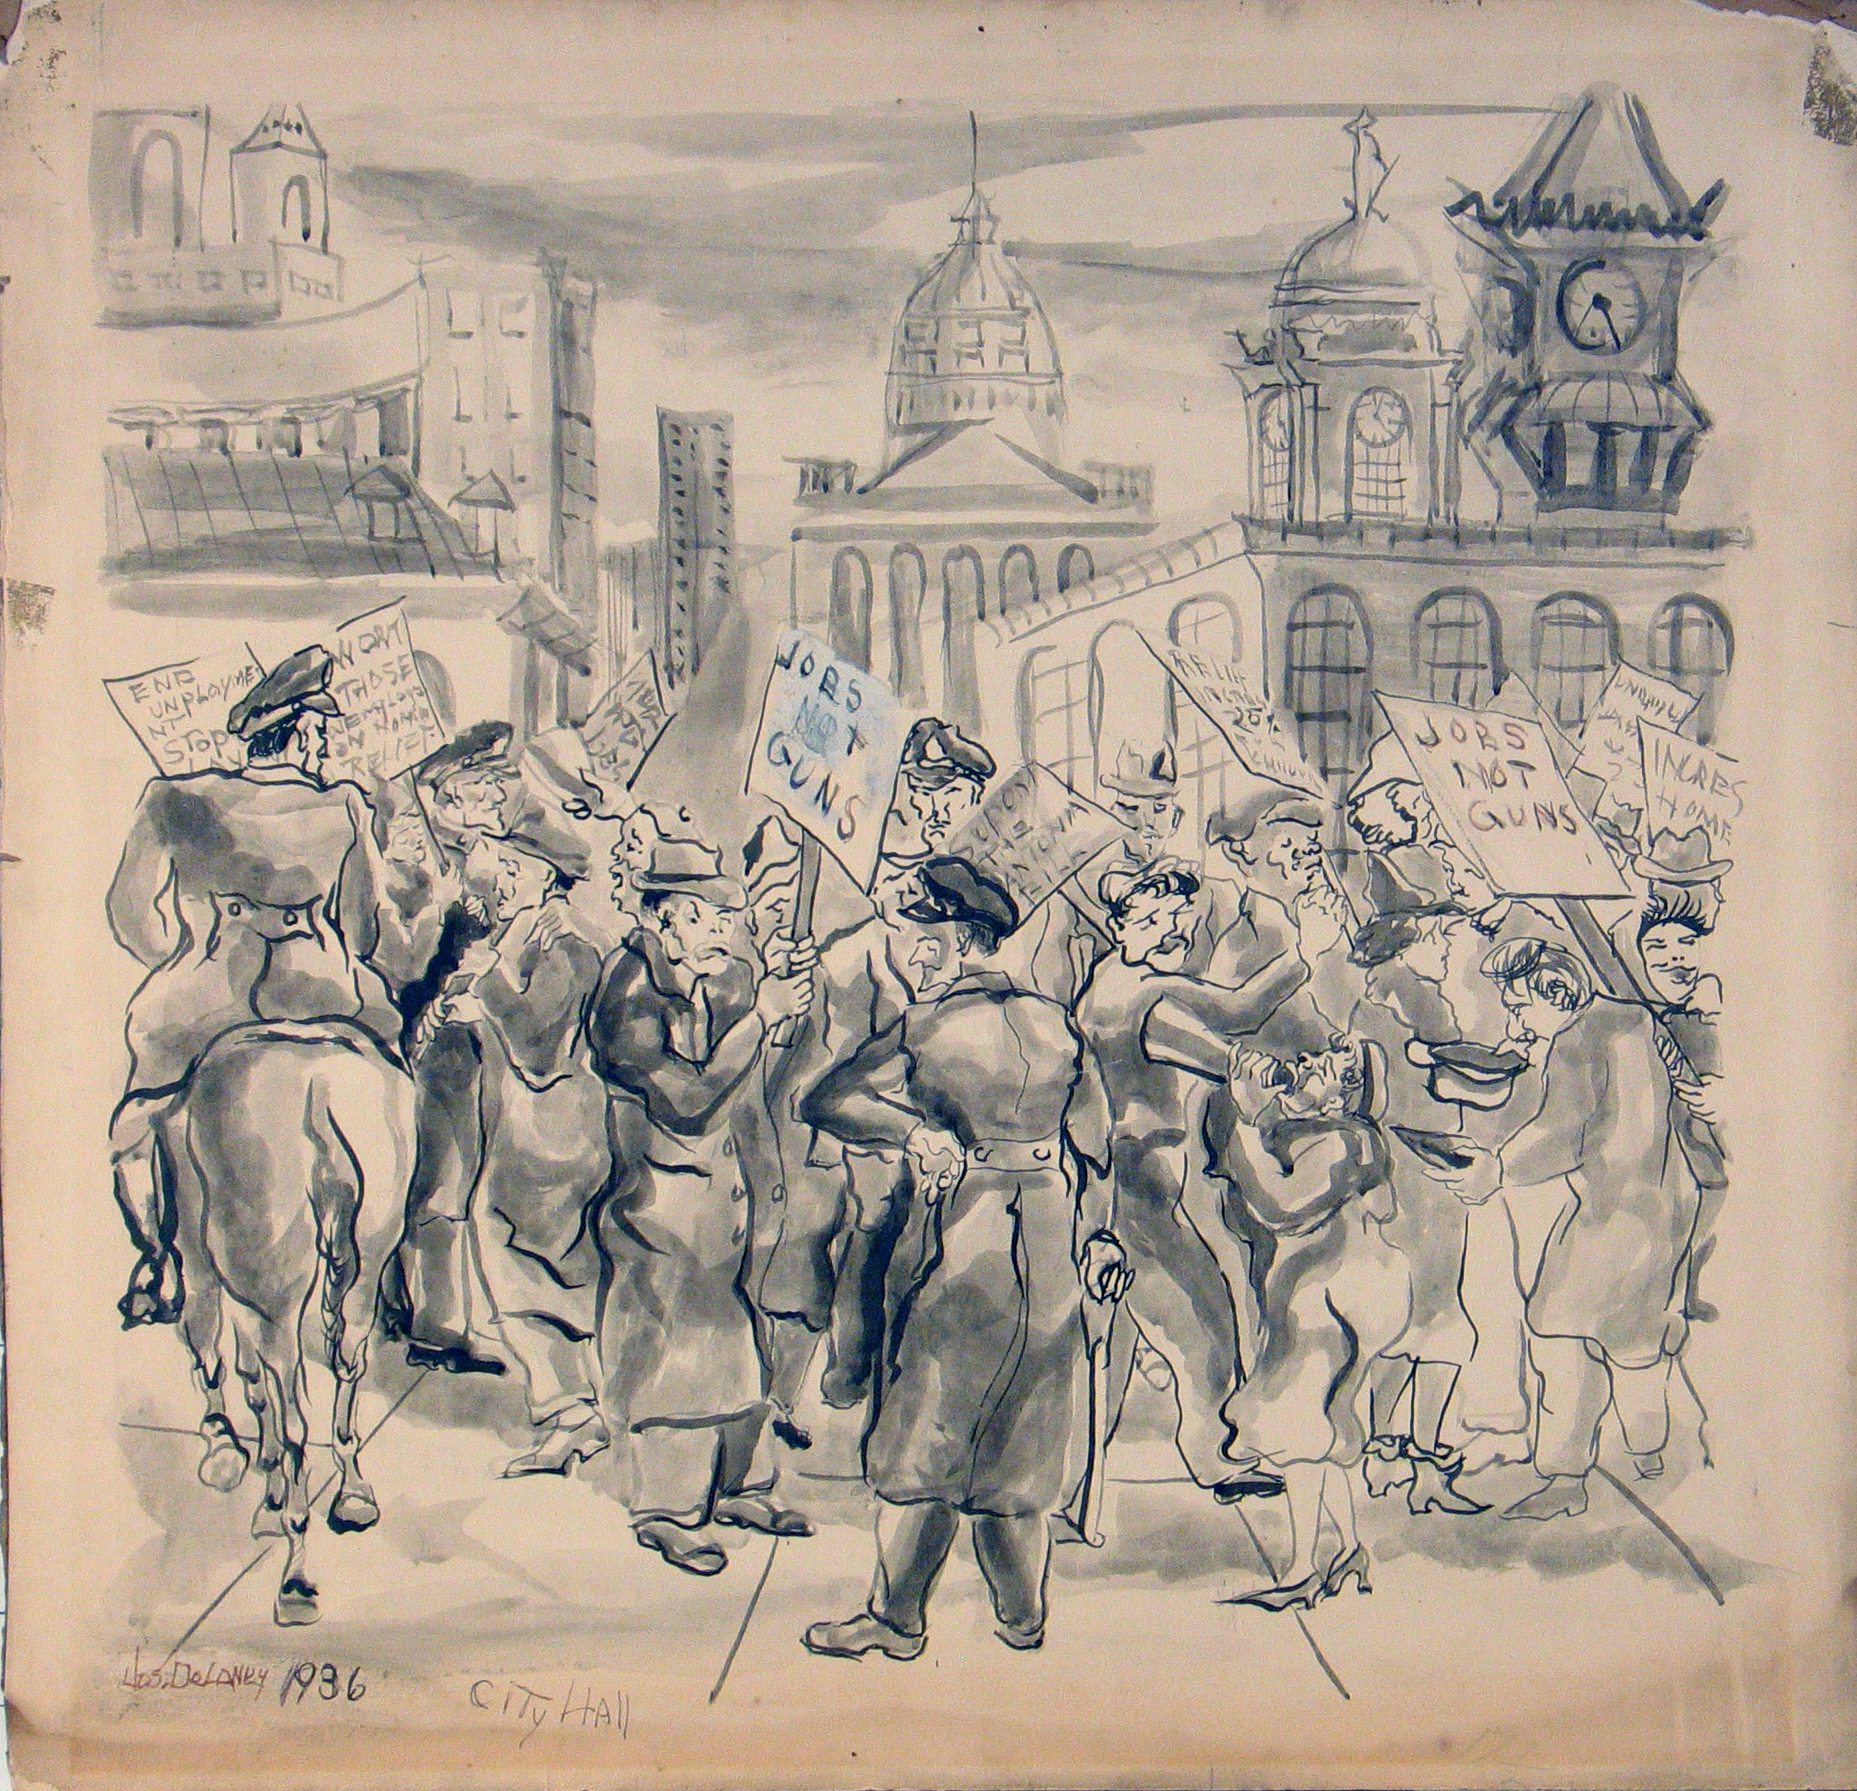 Joseph Delaney, City Hall Picket Line Jobs Not Guns, 1936, pencil and gouache on paper, 19 x 19 inches